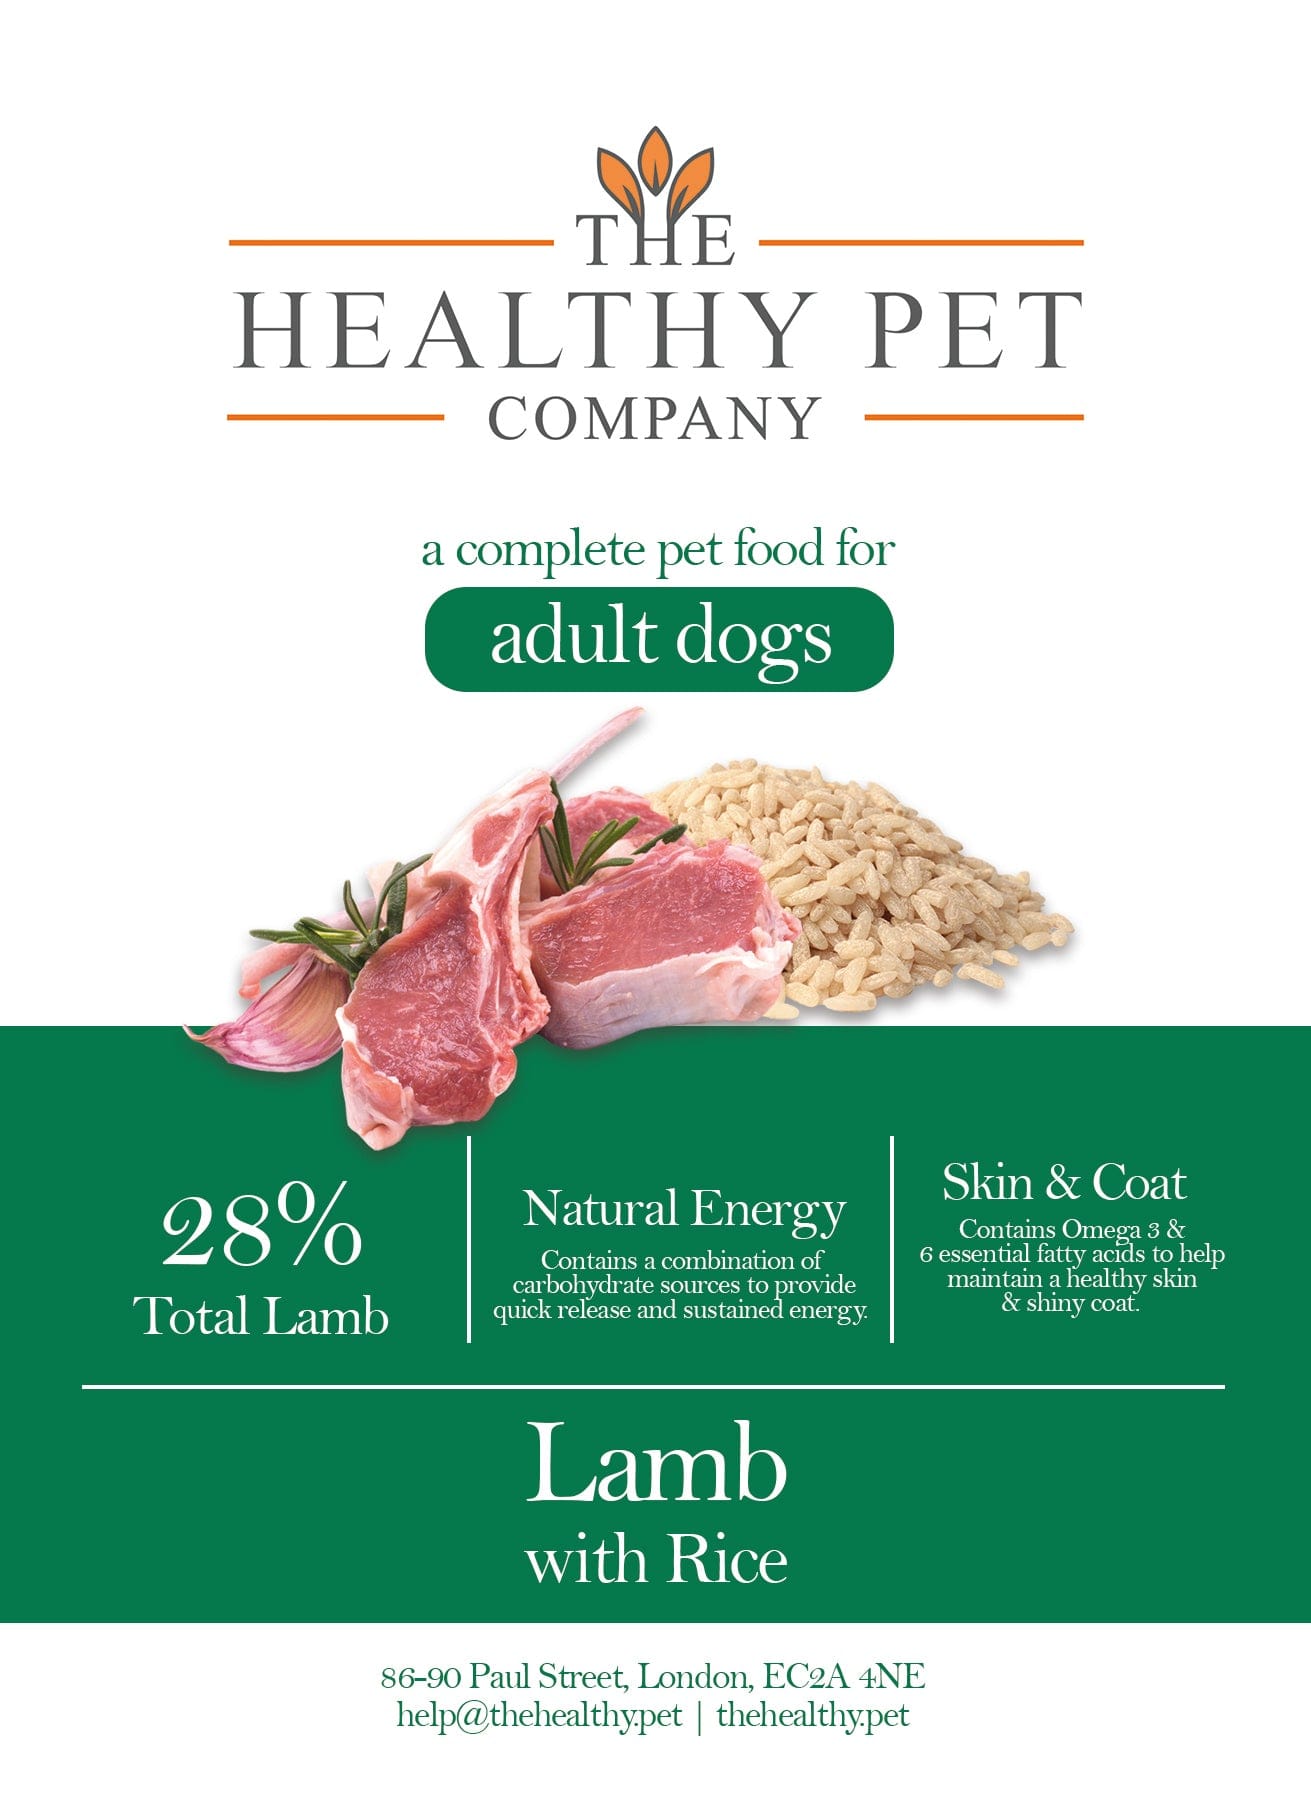 The Healthy Pet Company Complete Meal - Lamb with Rice for Adult Dogs - The Healthy Pet Company